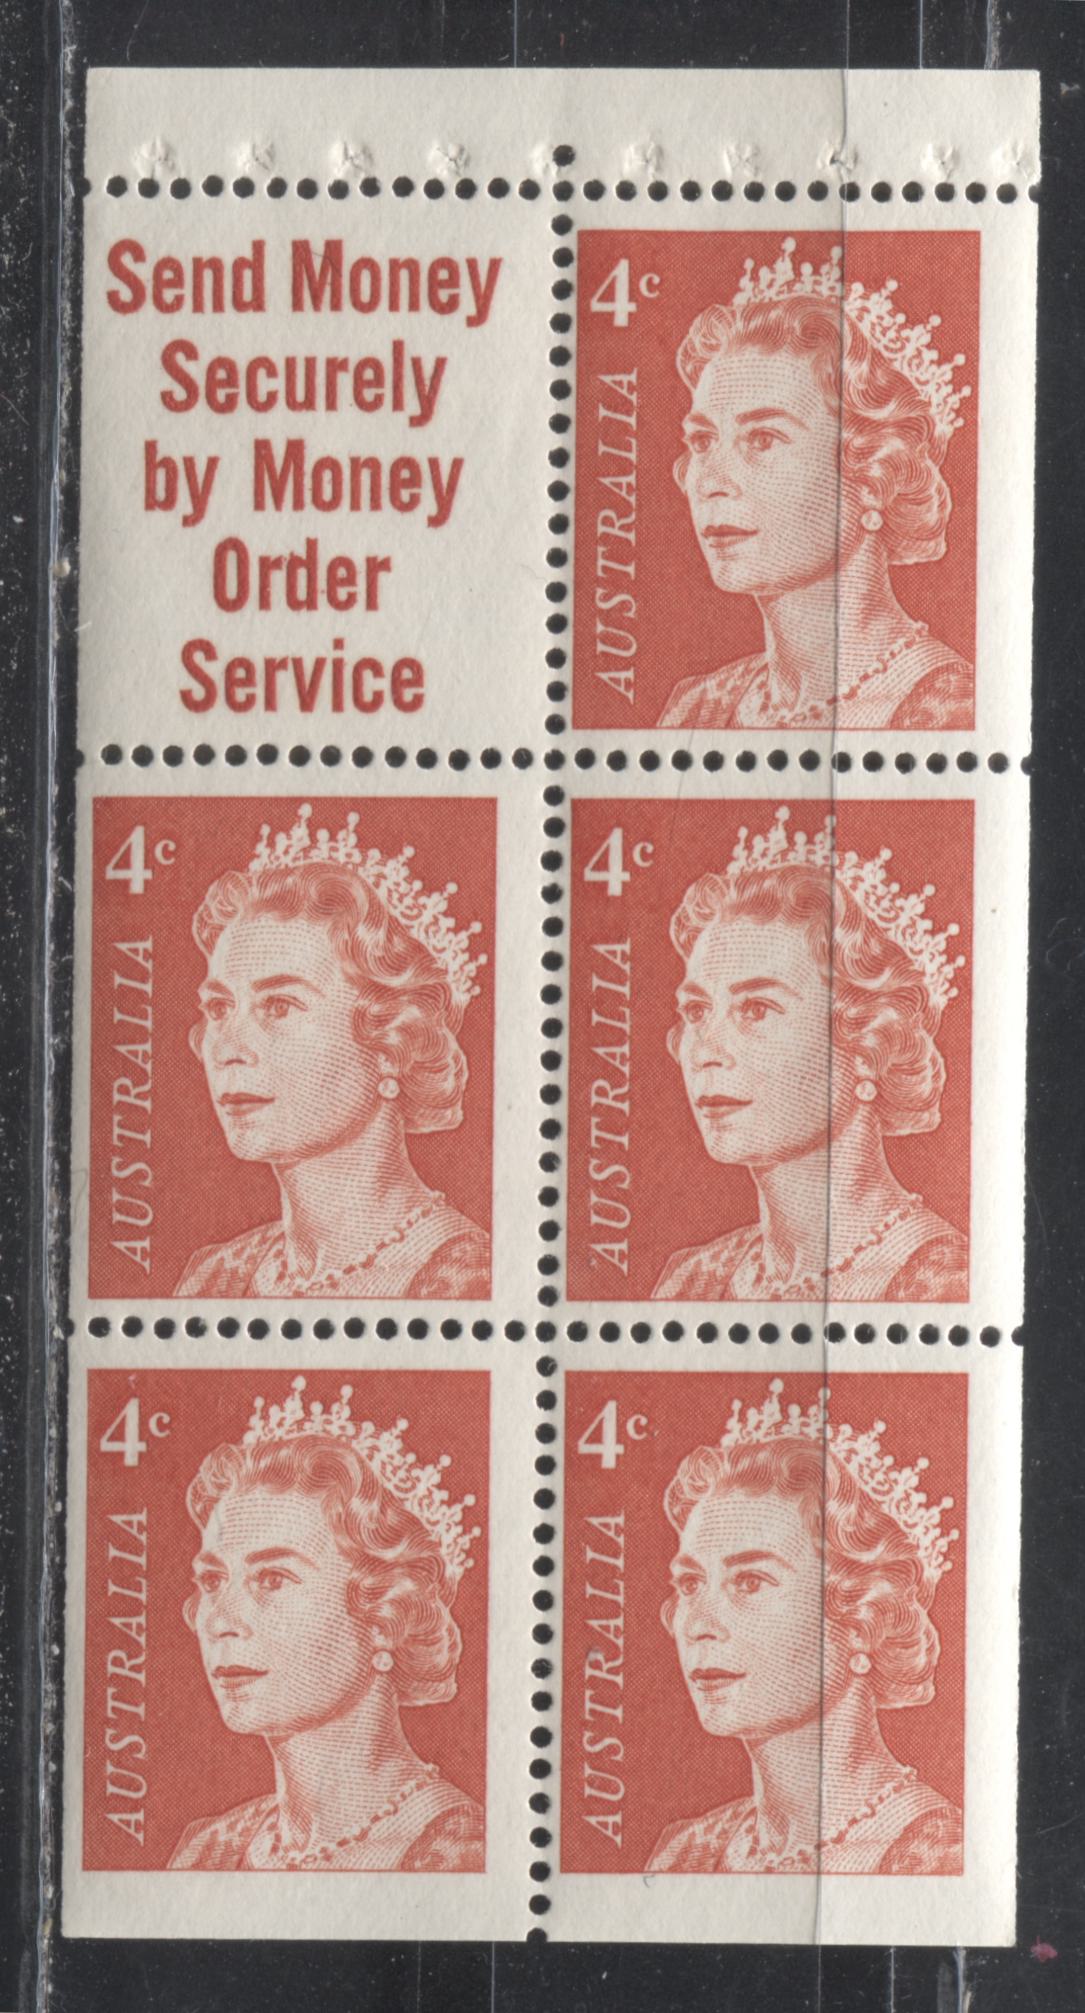 Australia #397a (SG#385a) 4c Orange Red Queen Elizabeth II 1966-1973 Decimal Definitive Issue, a Fine NH Booklet Pane of 5 + Label, Printed on Helecon Paper